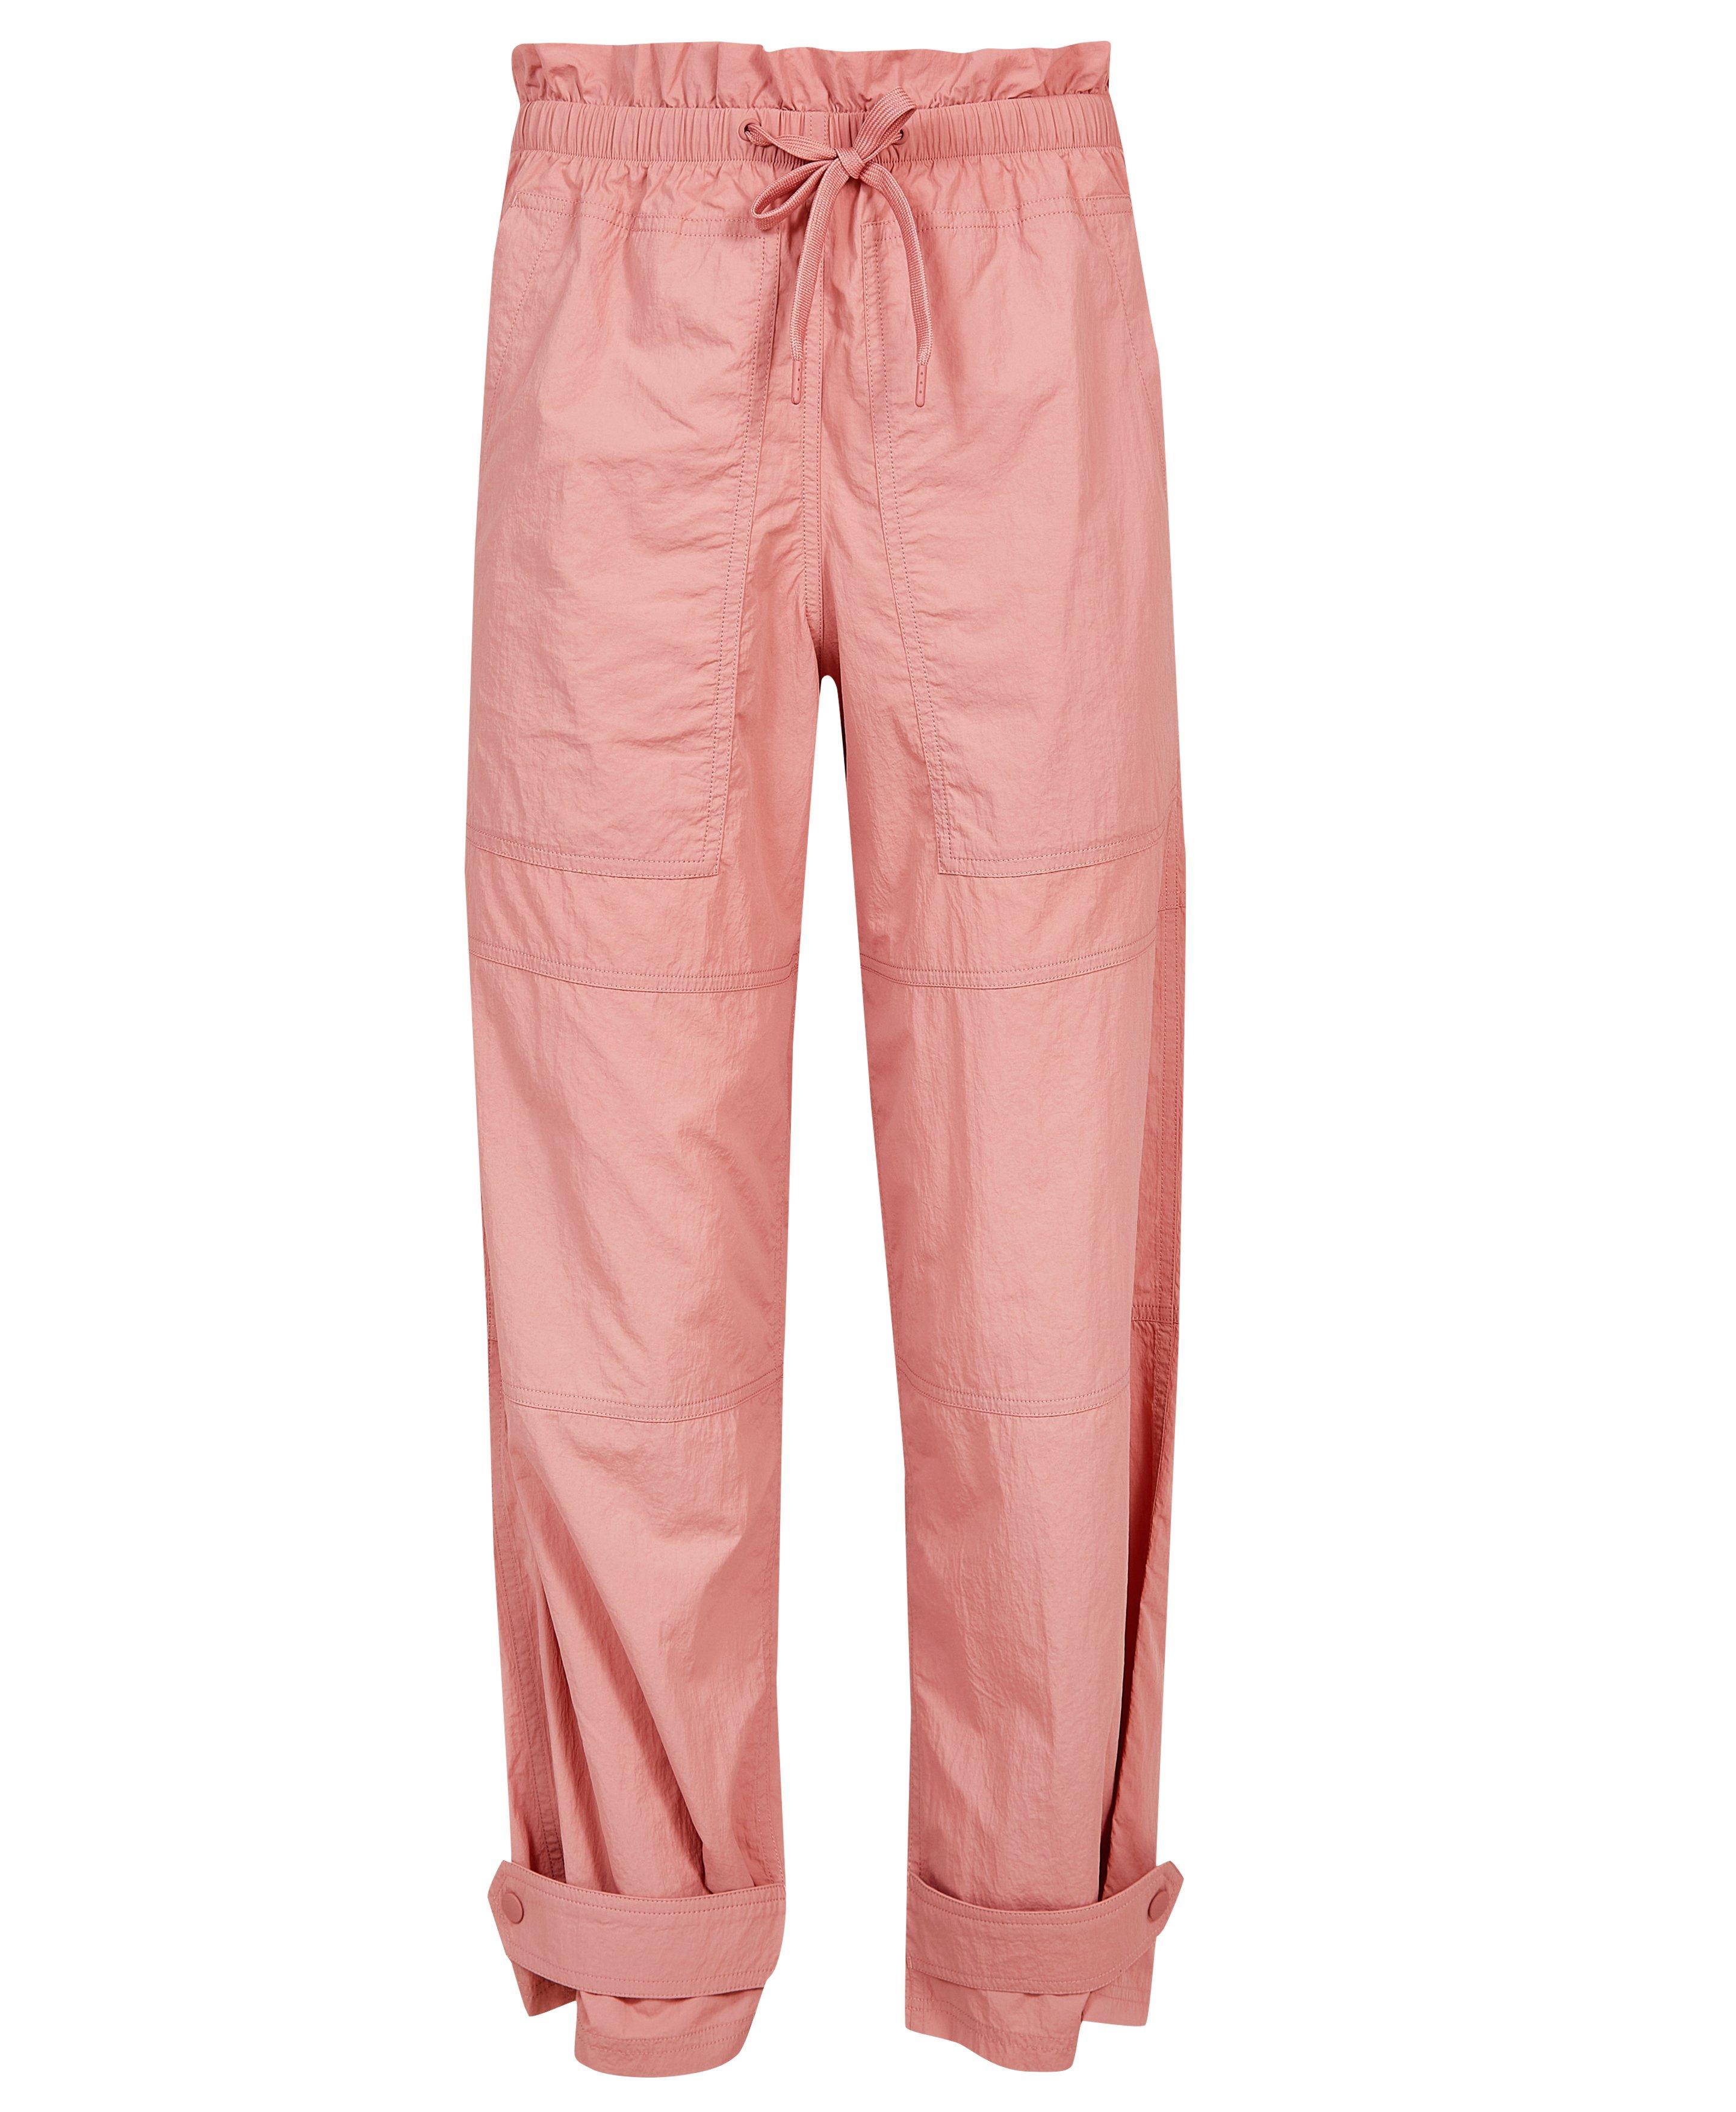 Jet Lightweight Pant - Clay Pink, Women's Trousers & Yoga Pants